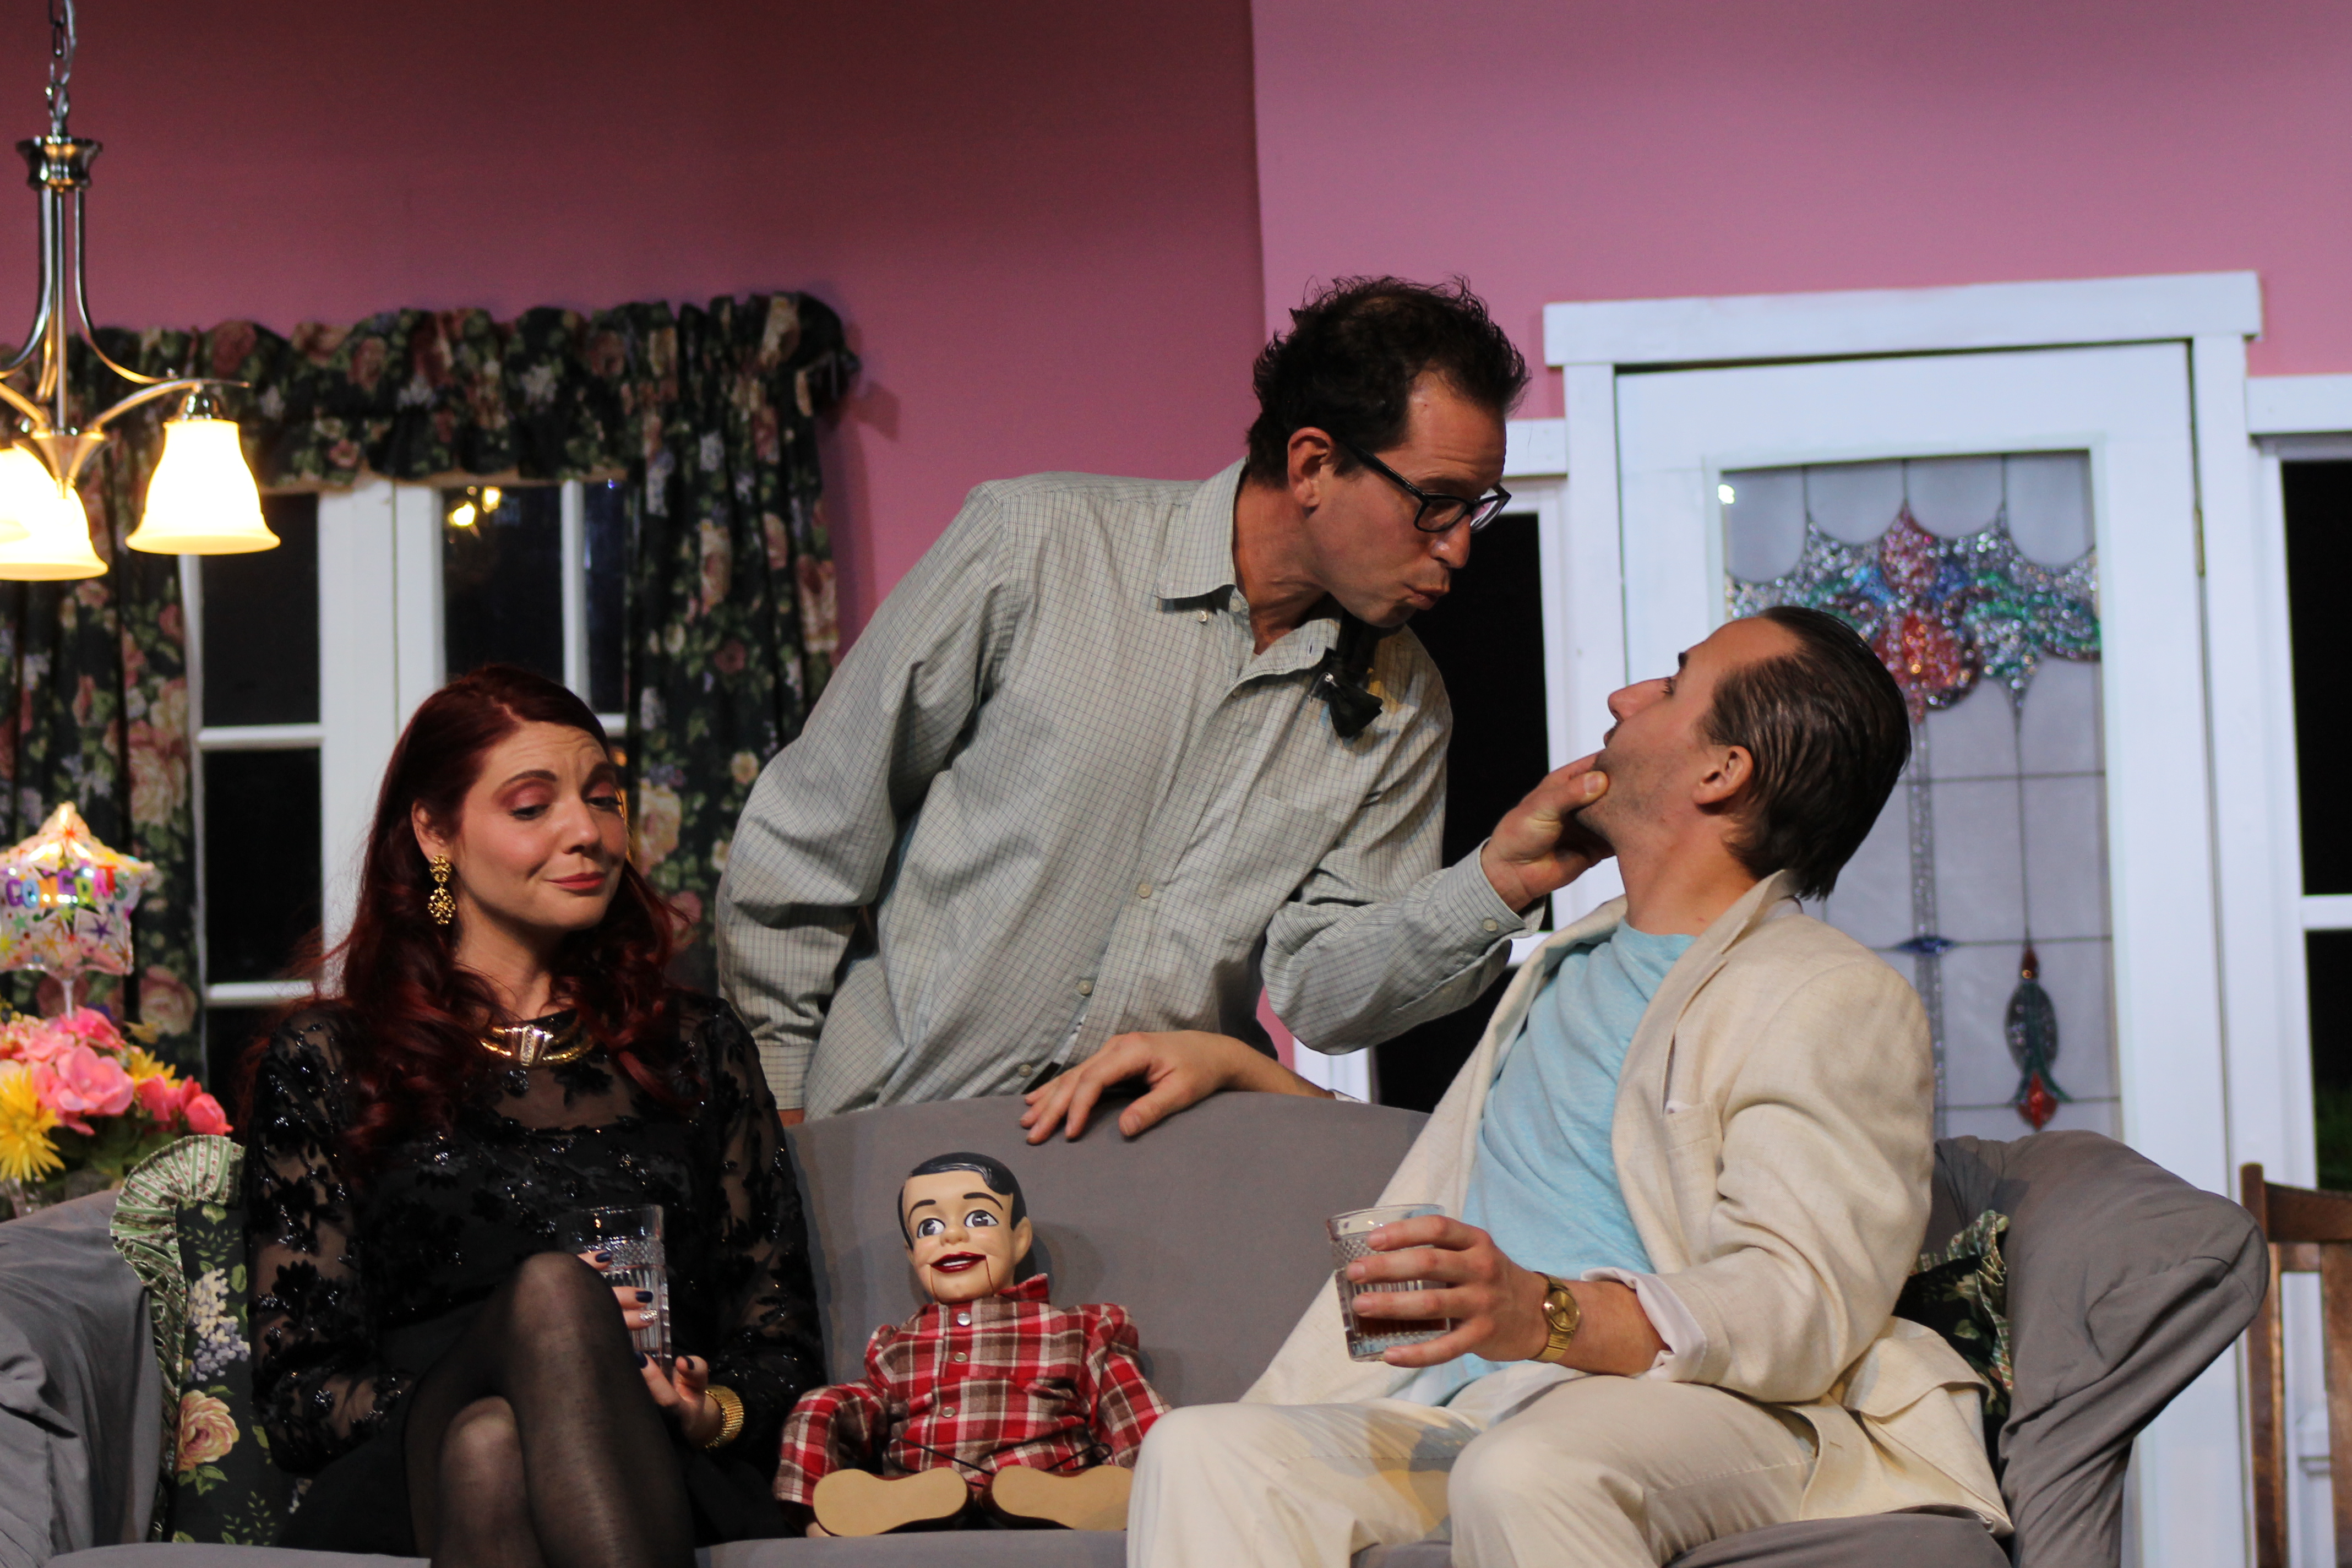 Horace (center on couch) gets into the middle of things with former lovers Jennifer (Brooke Bartell Goergen) and Wayne (Anthony Wizner) as Charlie (Marc Ruffino) makes a point.